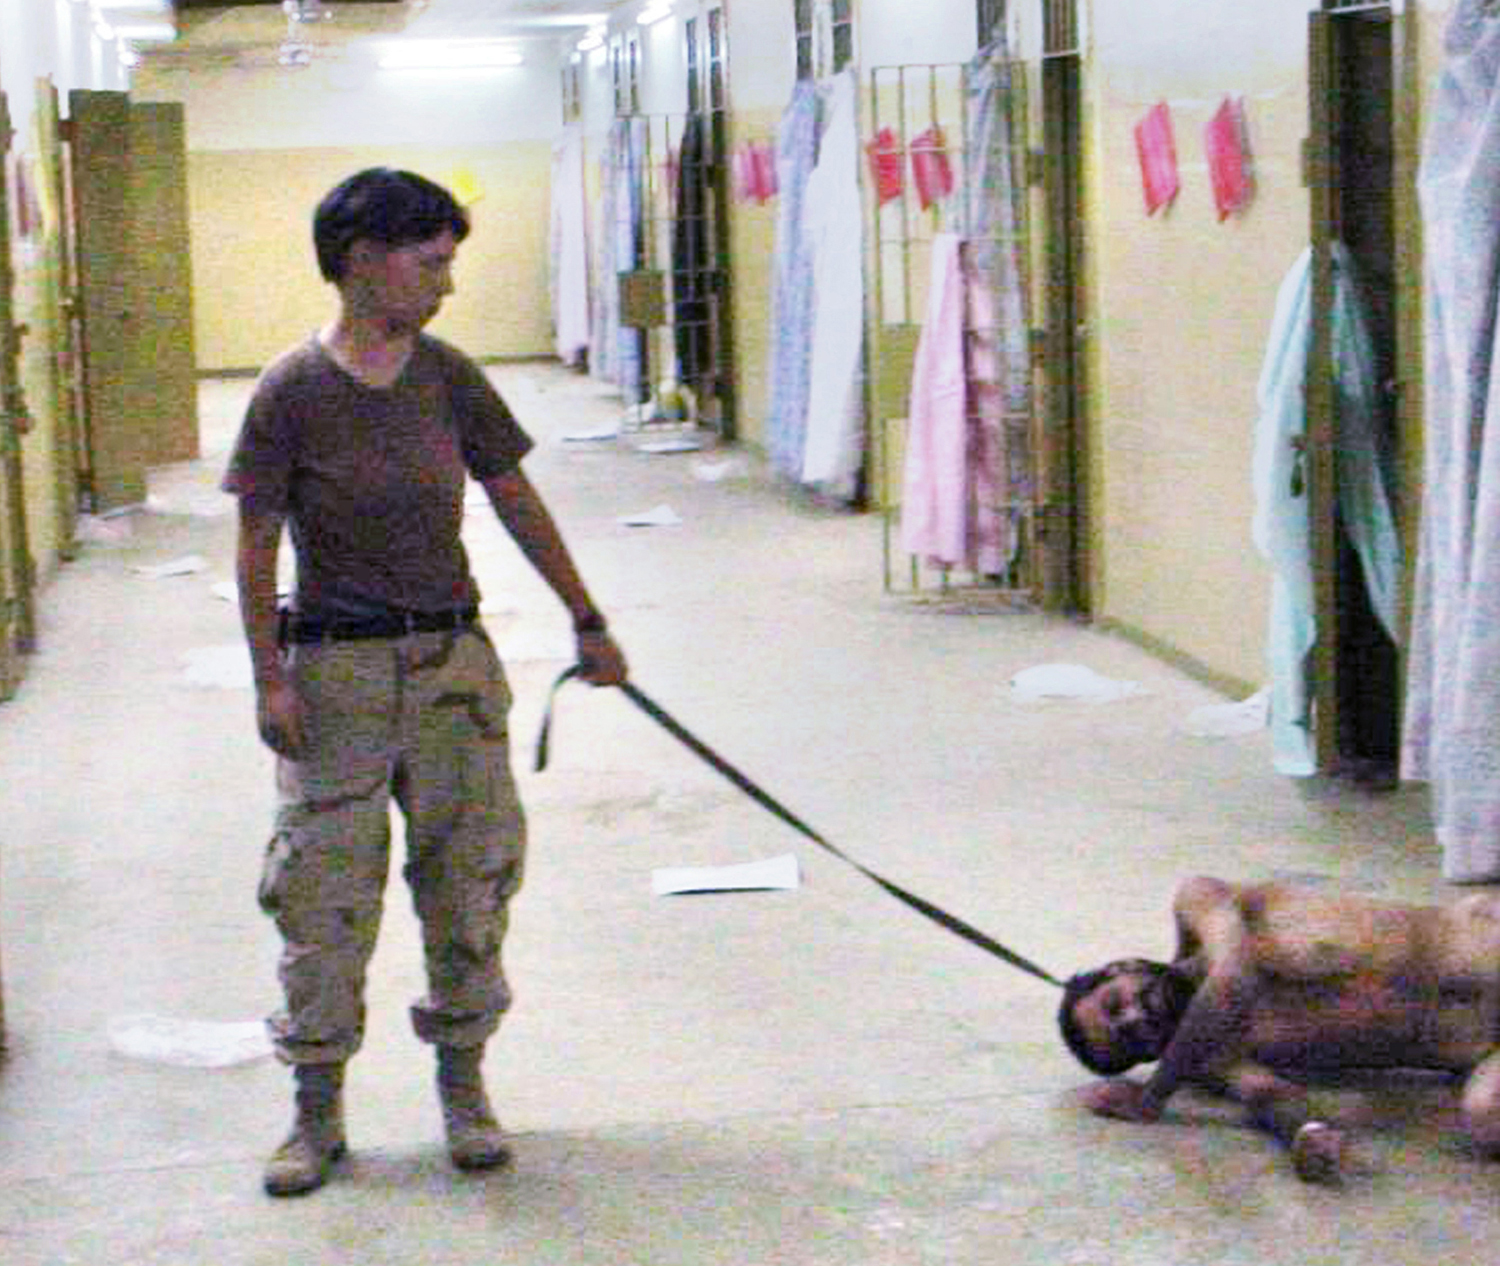 U.S. Army Spc. Lynndie England with a naked detainee at the Abu Ghraib prison in Baghdad, Iraq. Date unknown.